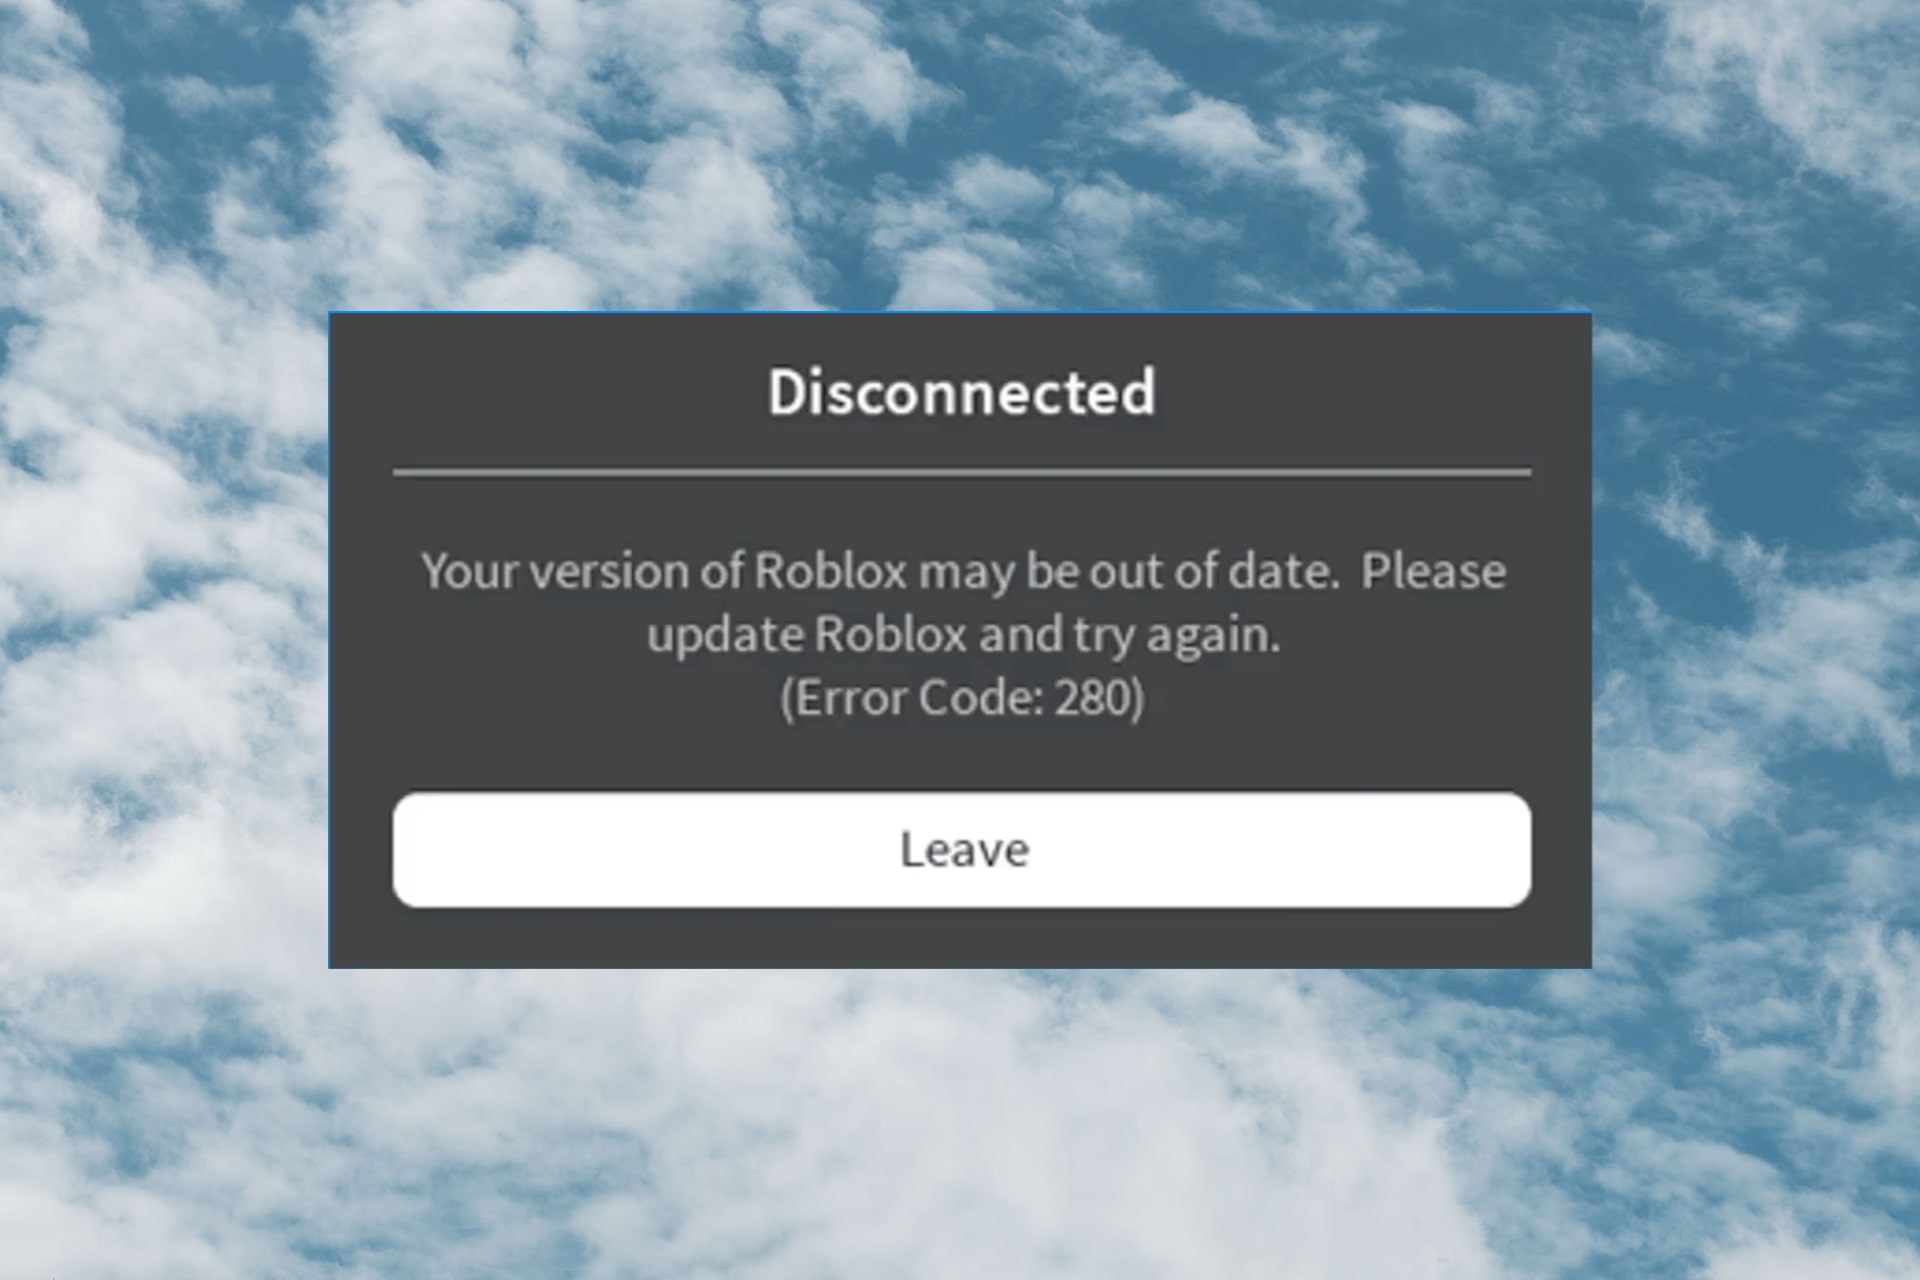 ROBLOX Upgrade - Your Version Of Roblox Is Out Of Date And Will